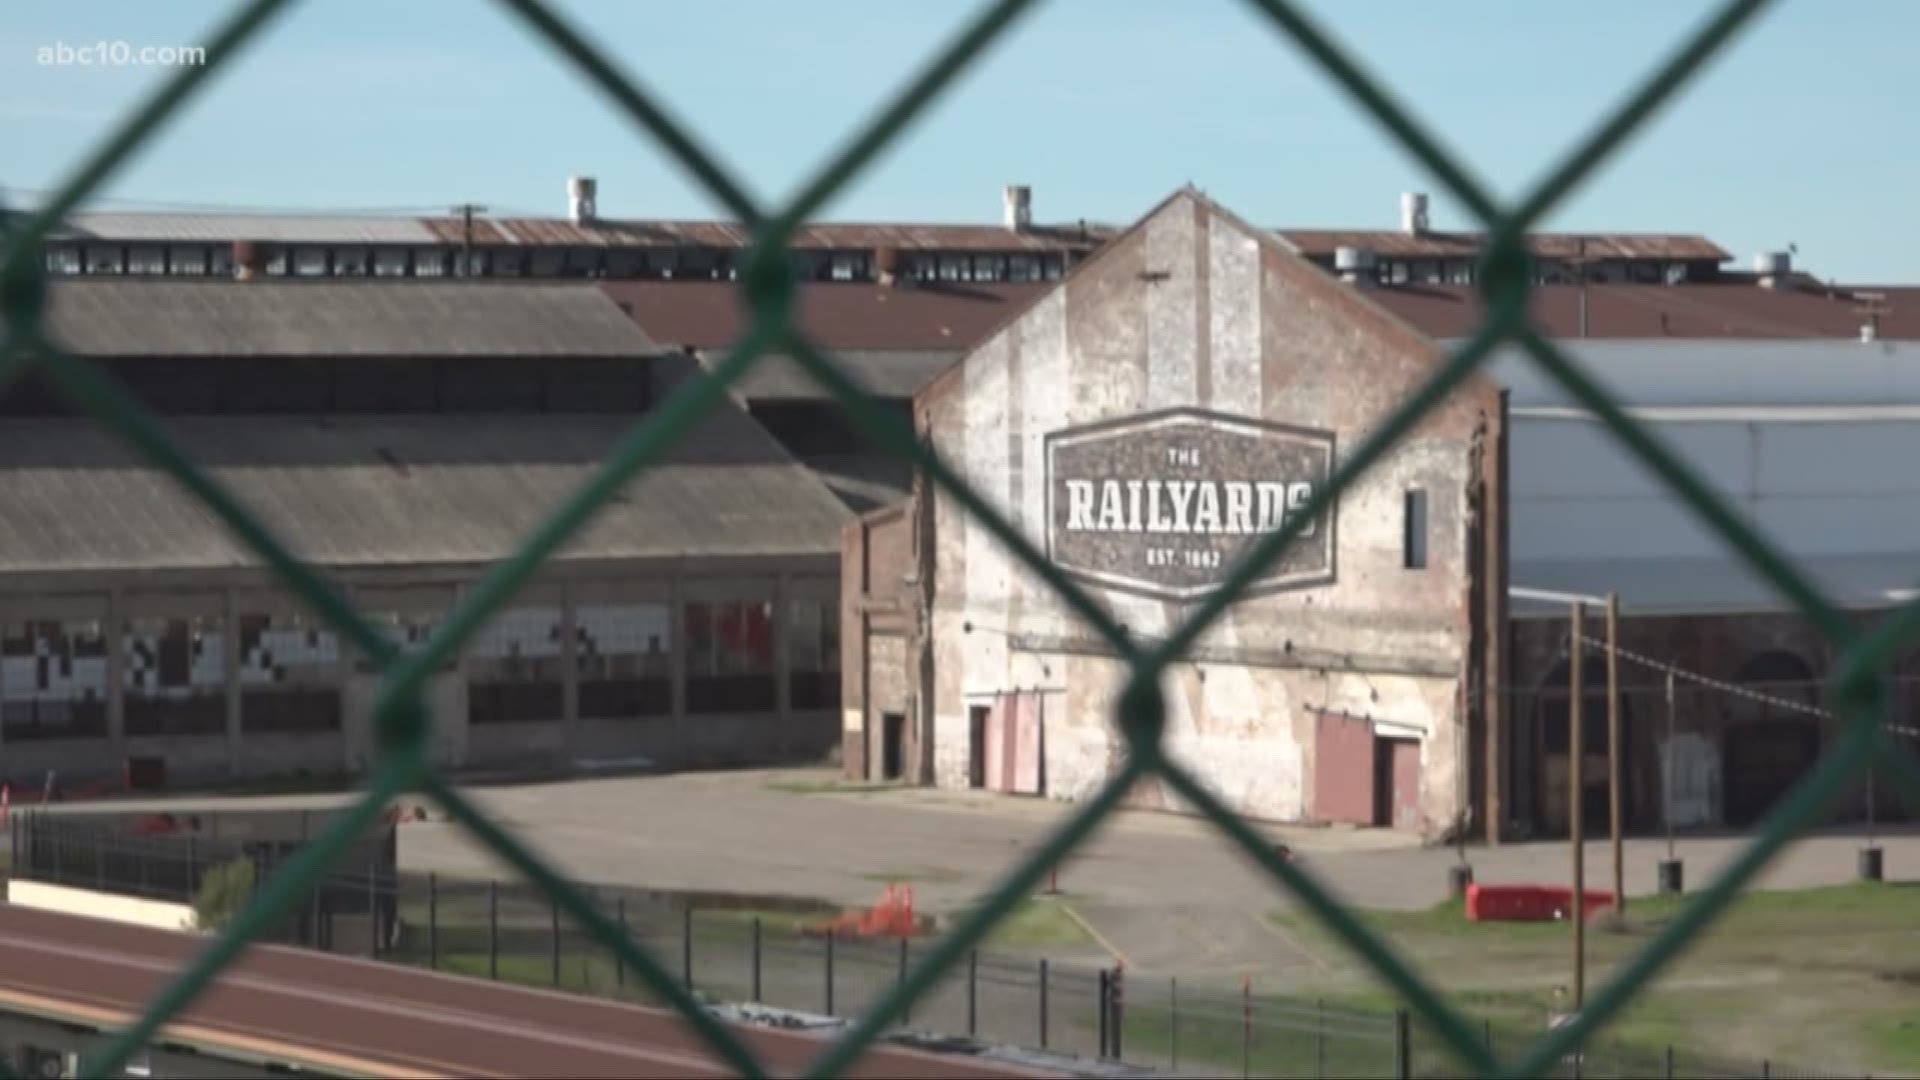 The Sacramento Railyards Project is closer to coming to life, according to the Downtown Sacramento Partnership. Kaiser announced it completed the purchase of approximately 18 acres new medical center. Also, Mayor Darrell Steinberg said the city's plan to attract an MLS team is still in the works thanks to a billionaire investor.